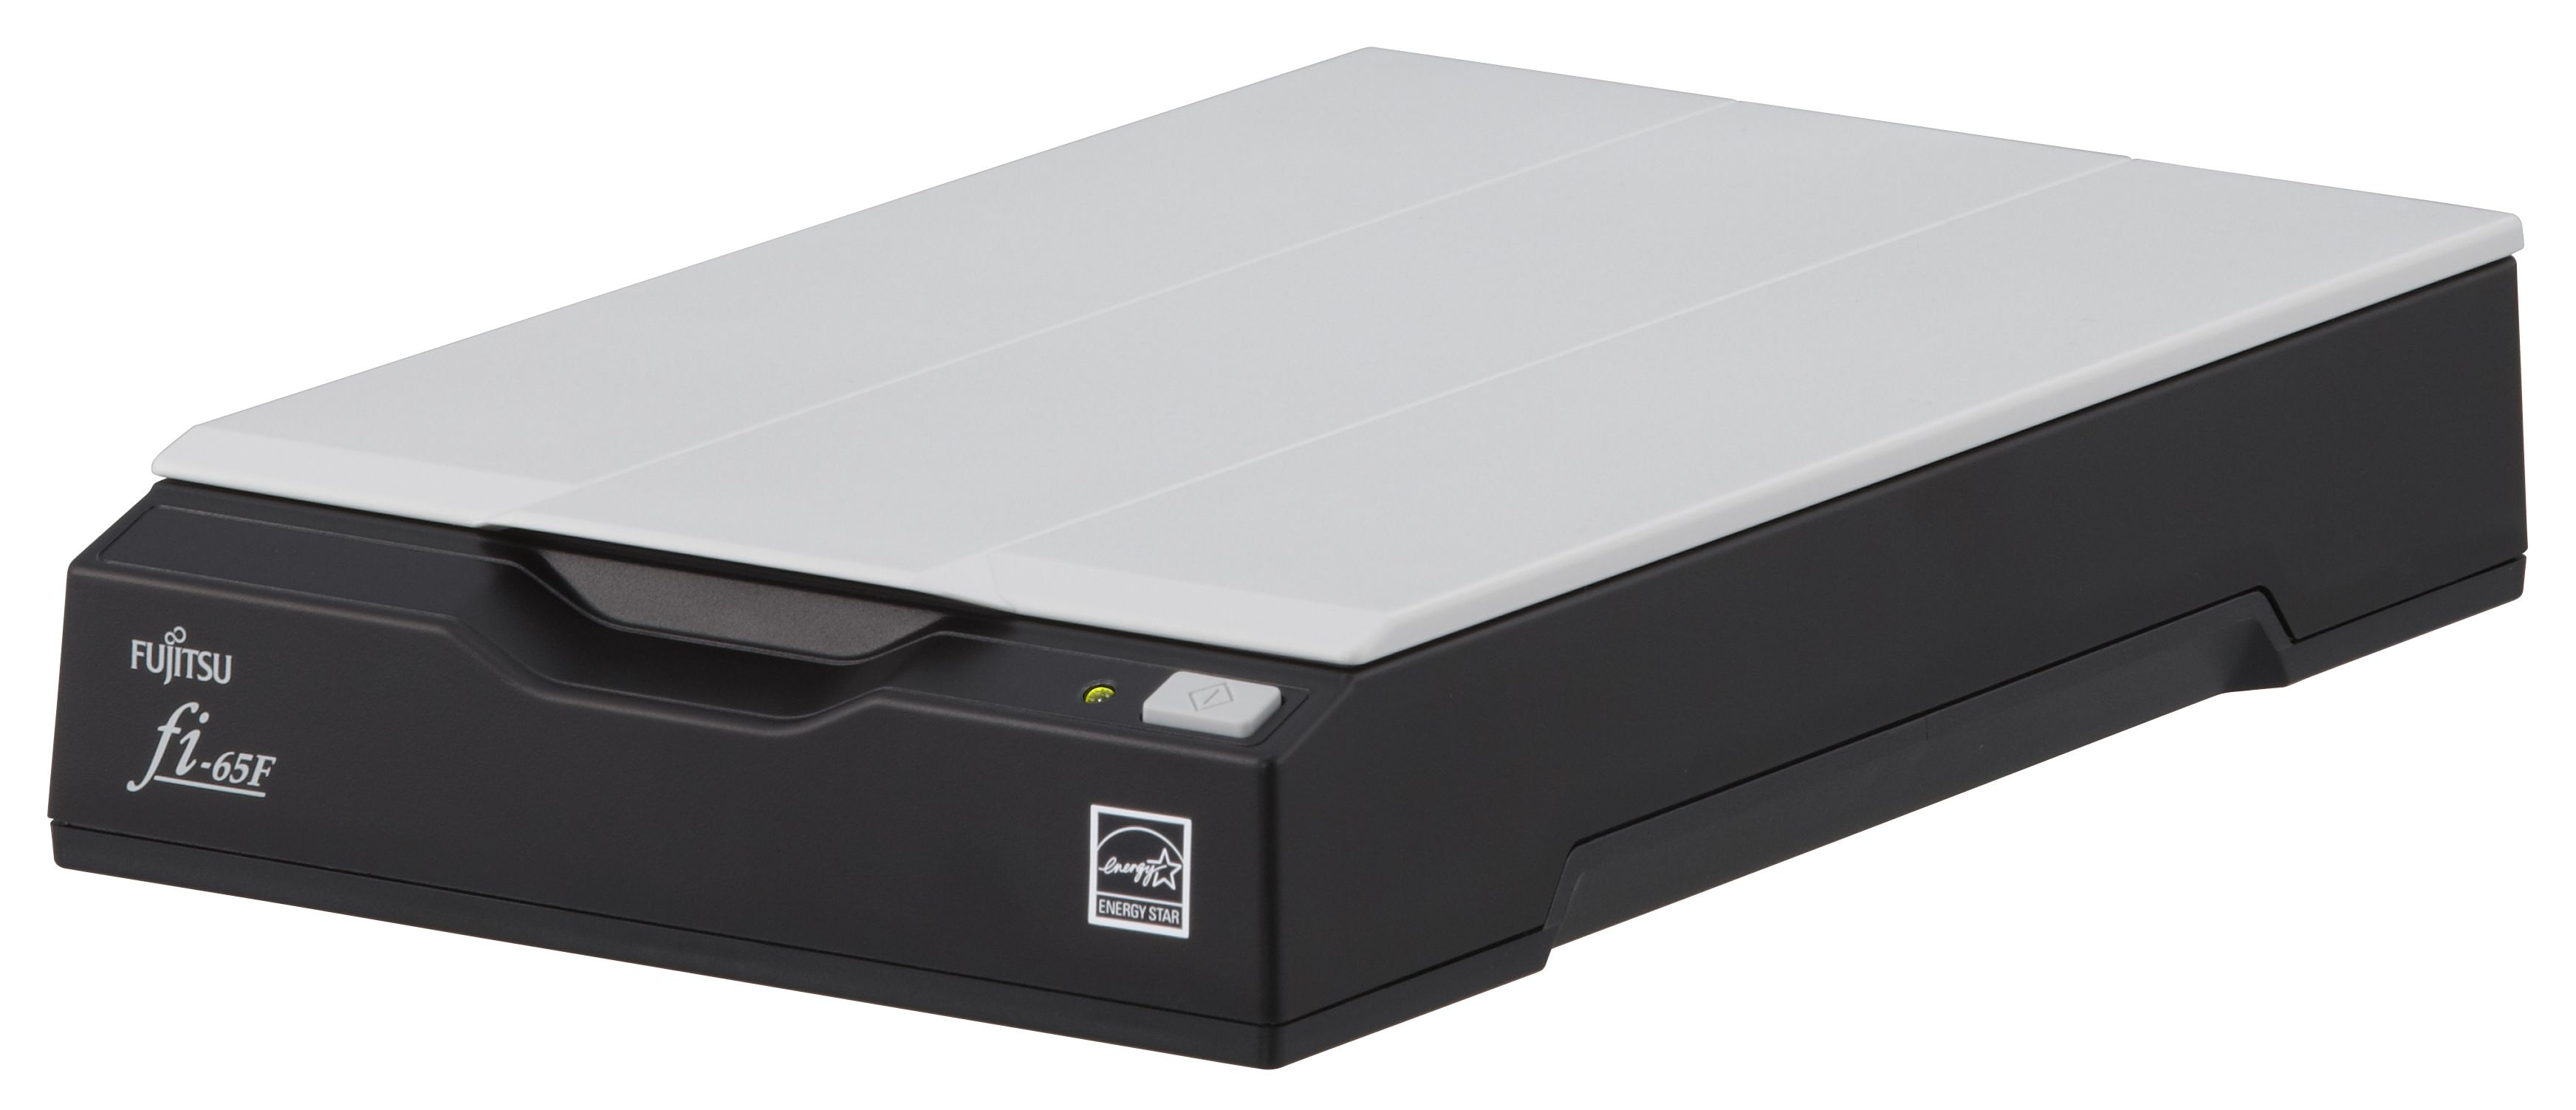 Fi-65F A6 small format flatbed scanner